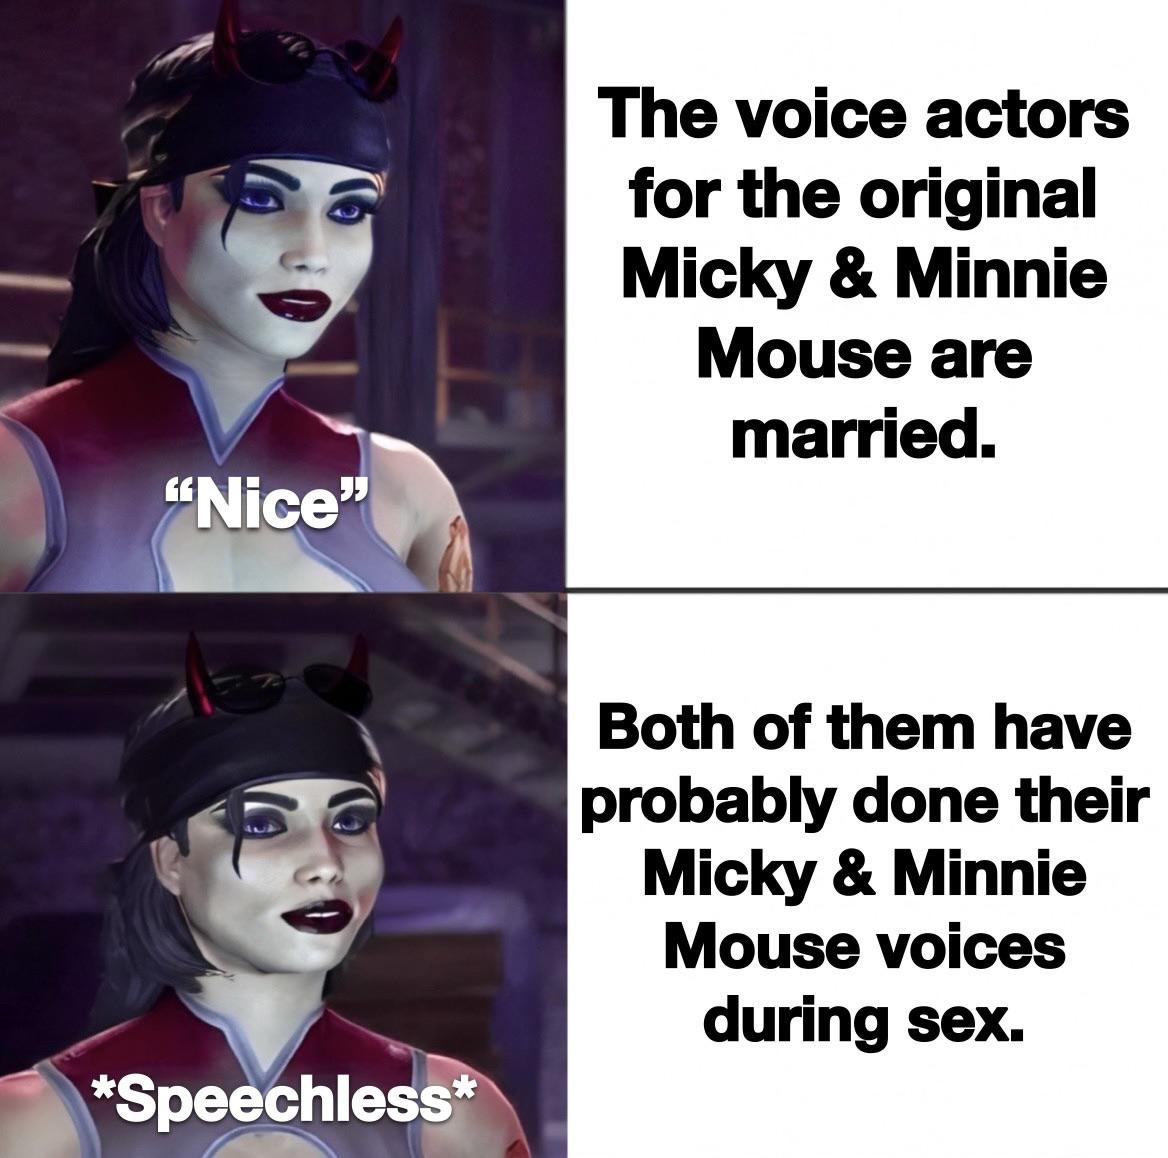 funny memes - Minnie Mouse - "Nice" Speechless The voice actors for the original Micky & Minnie Mouse are married. Both of them have probably done their Micky & Minnie Mouse voices during sex.